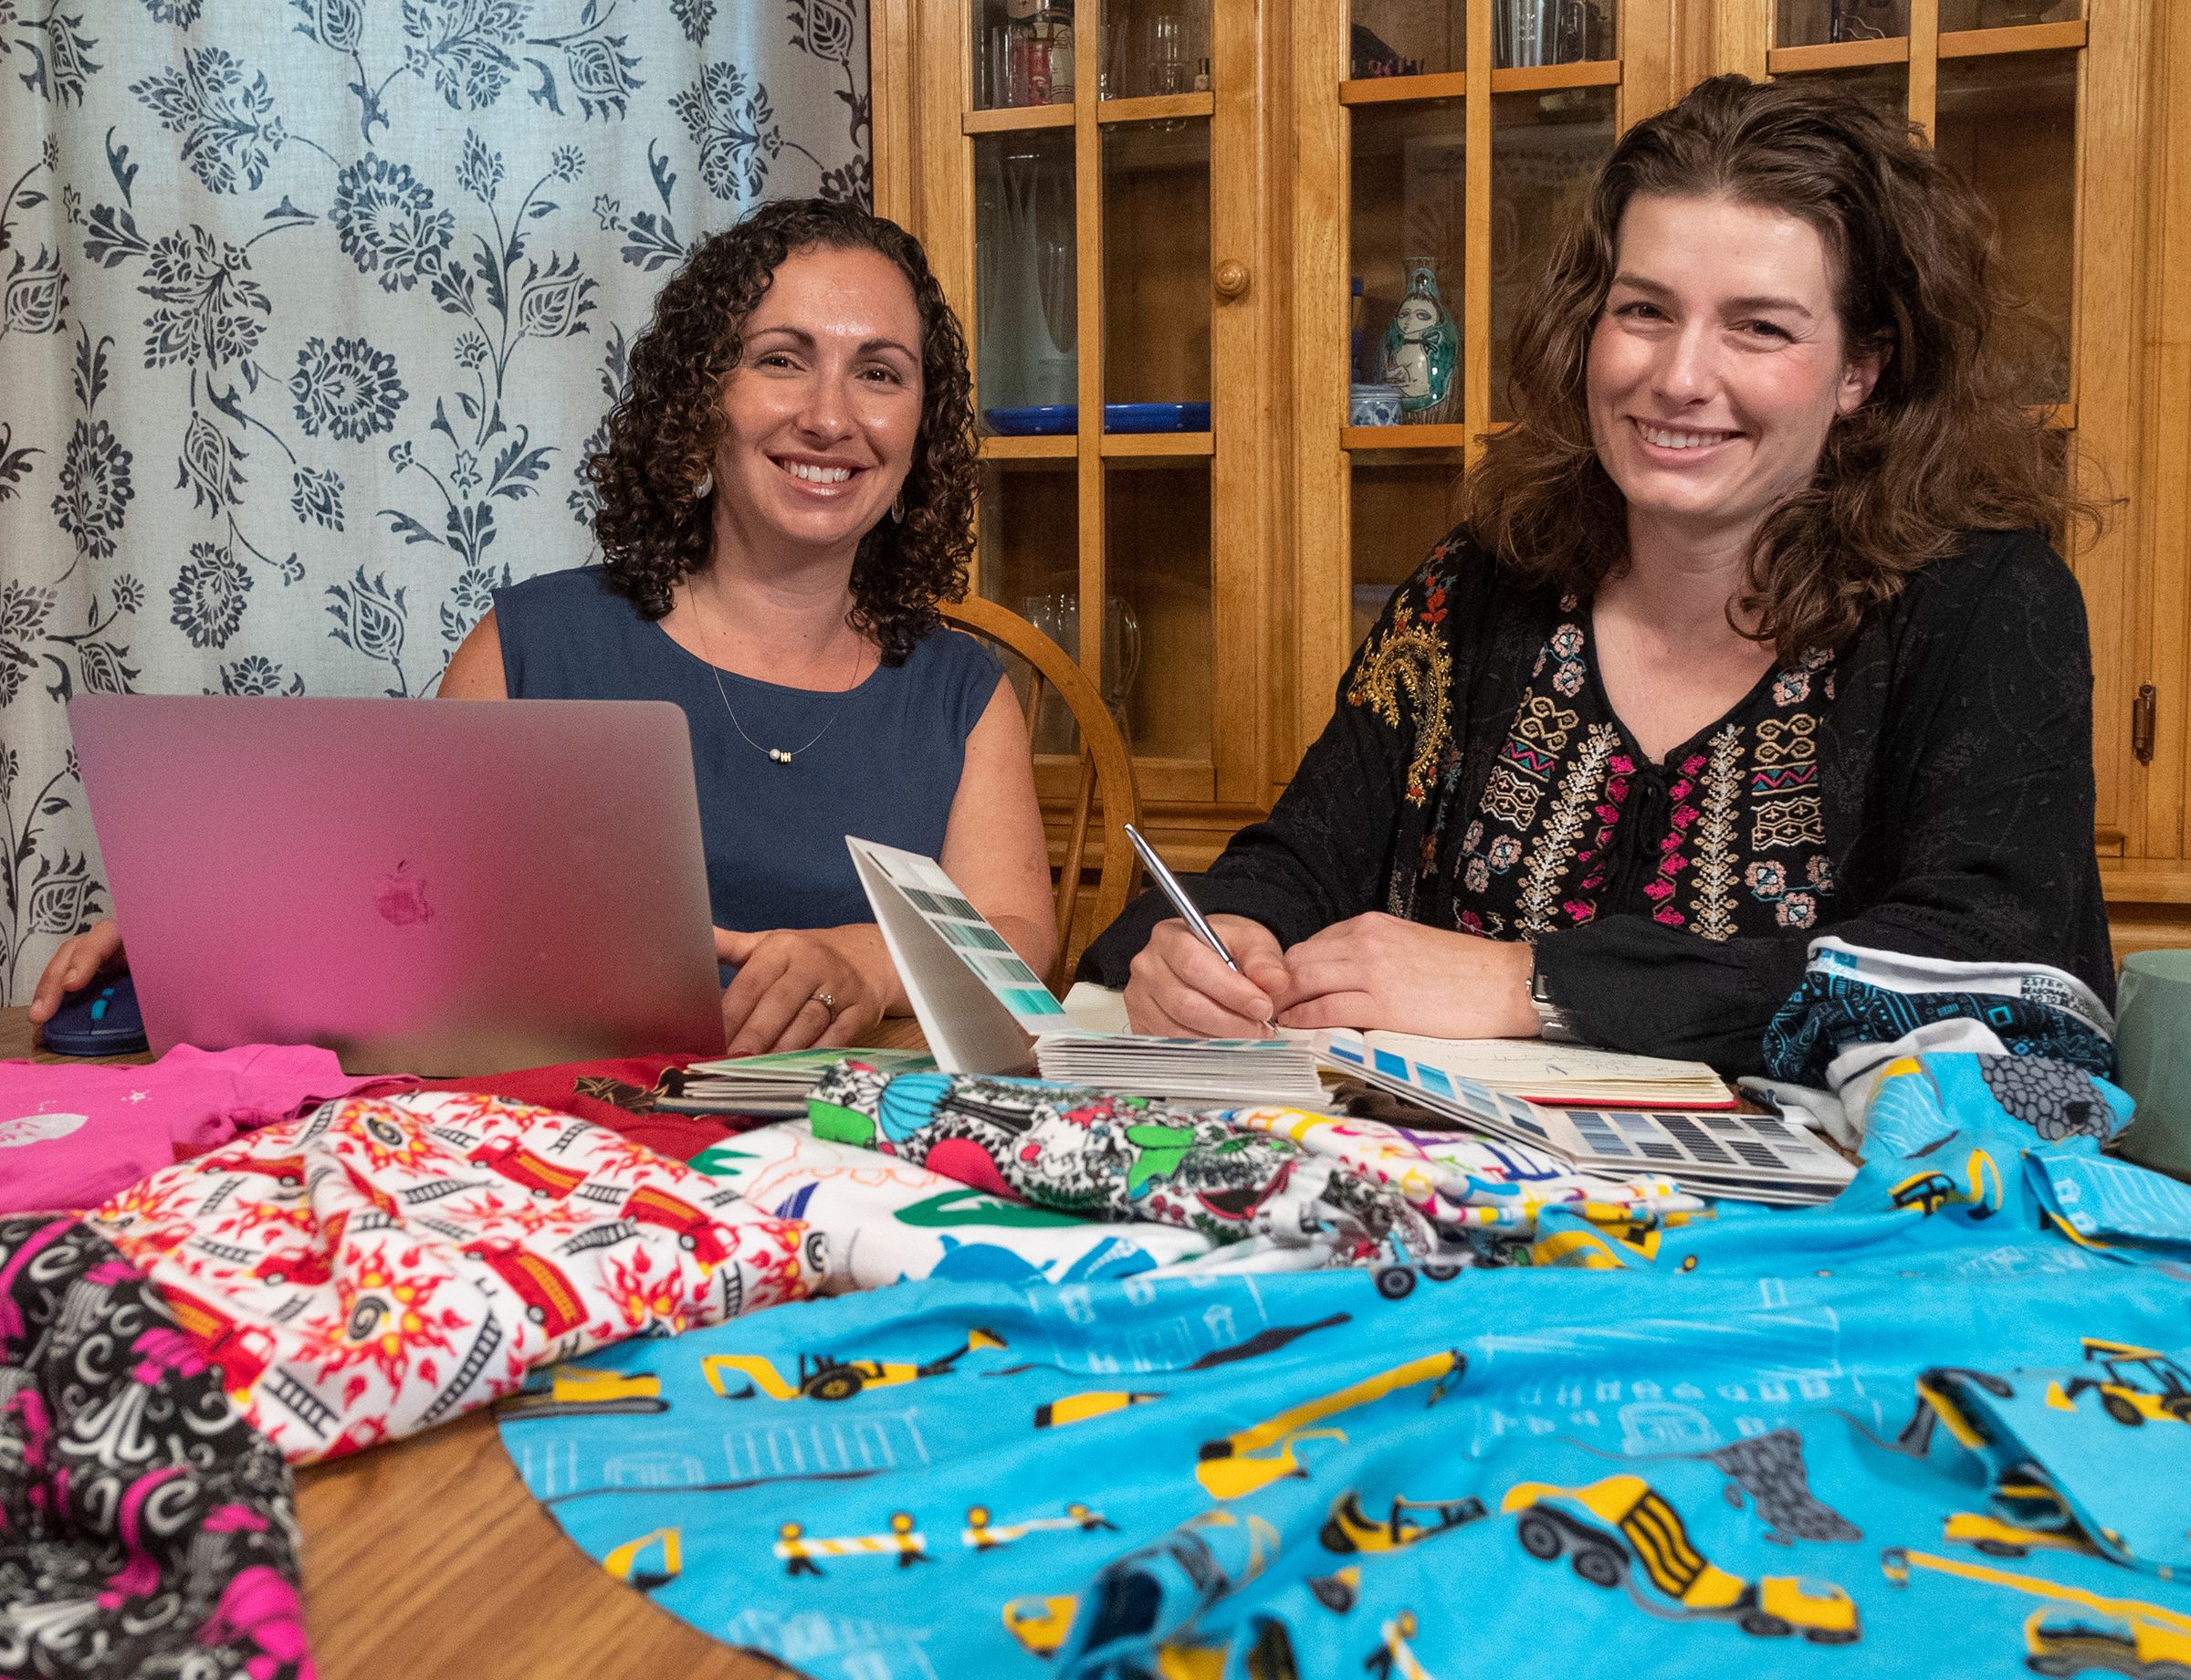 Princess Awesome creators Rebecca Melsky and Eva St. Clair are changing the way young girls dress, play and think with their line of clothing. 